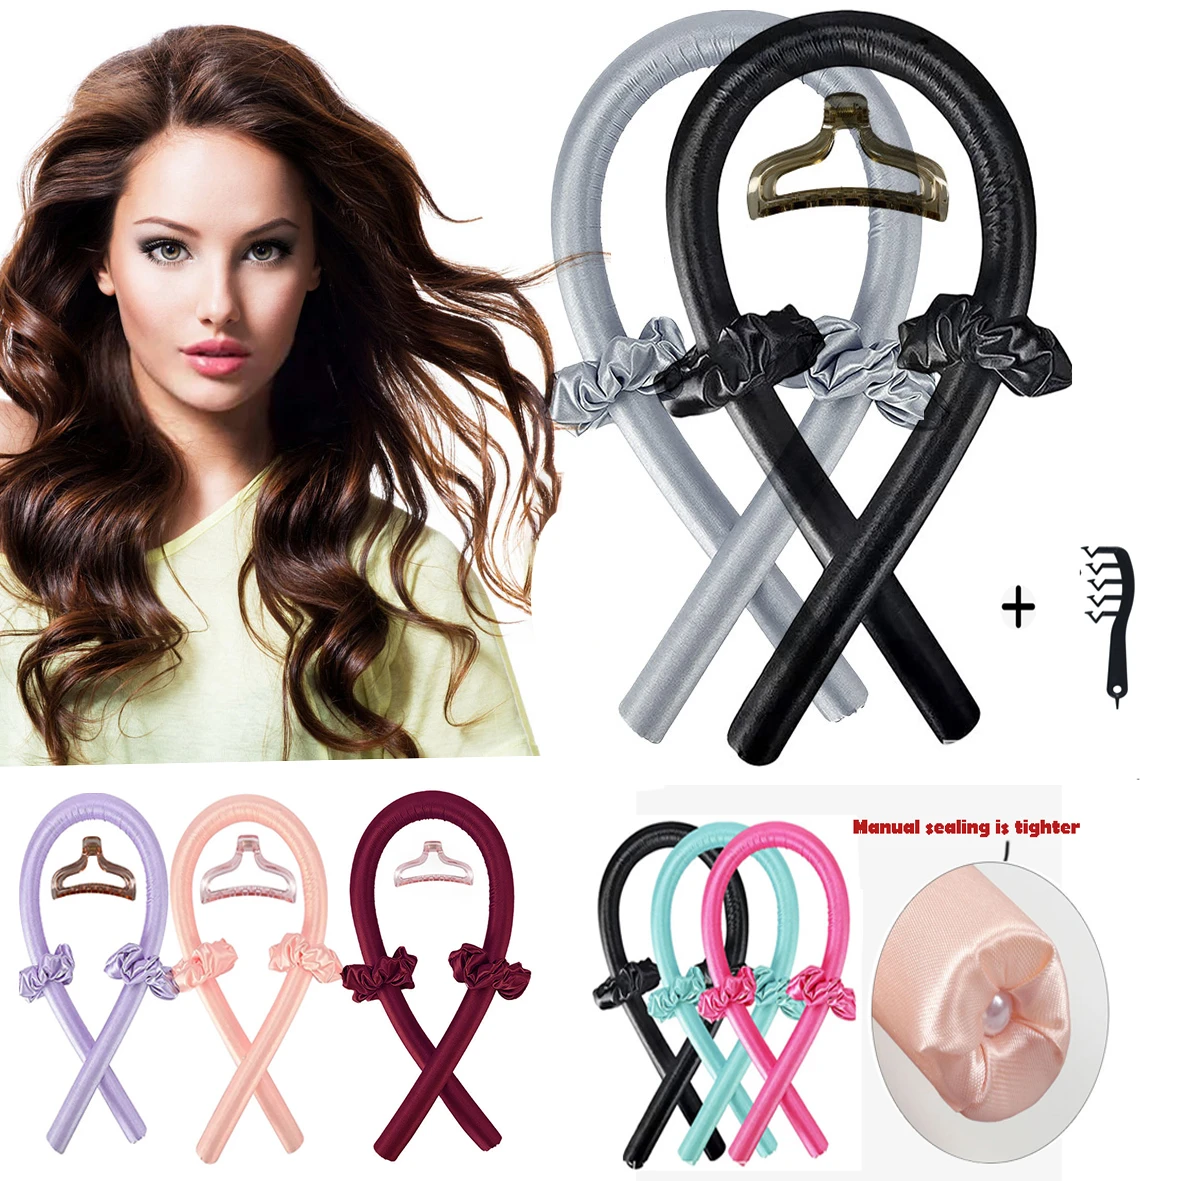 How To Avoid Hair Damage With Heatless Curls Toppik Blog | Heatless Hair  Curler,no Heat Hair Curlers Overnight Curls Curling Headband With 20 Hair  Pins And Drawstring Pouch For Long Hair And